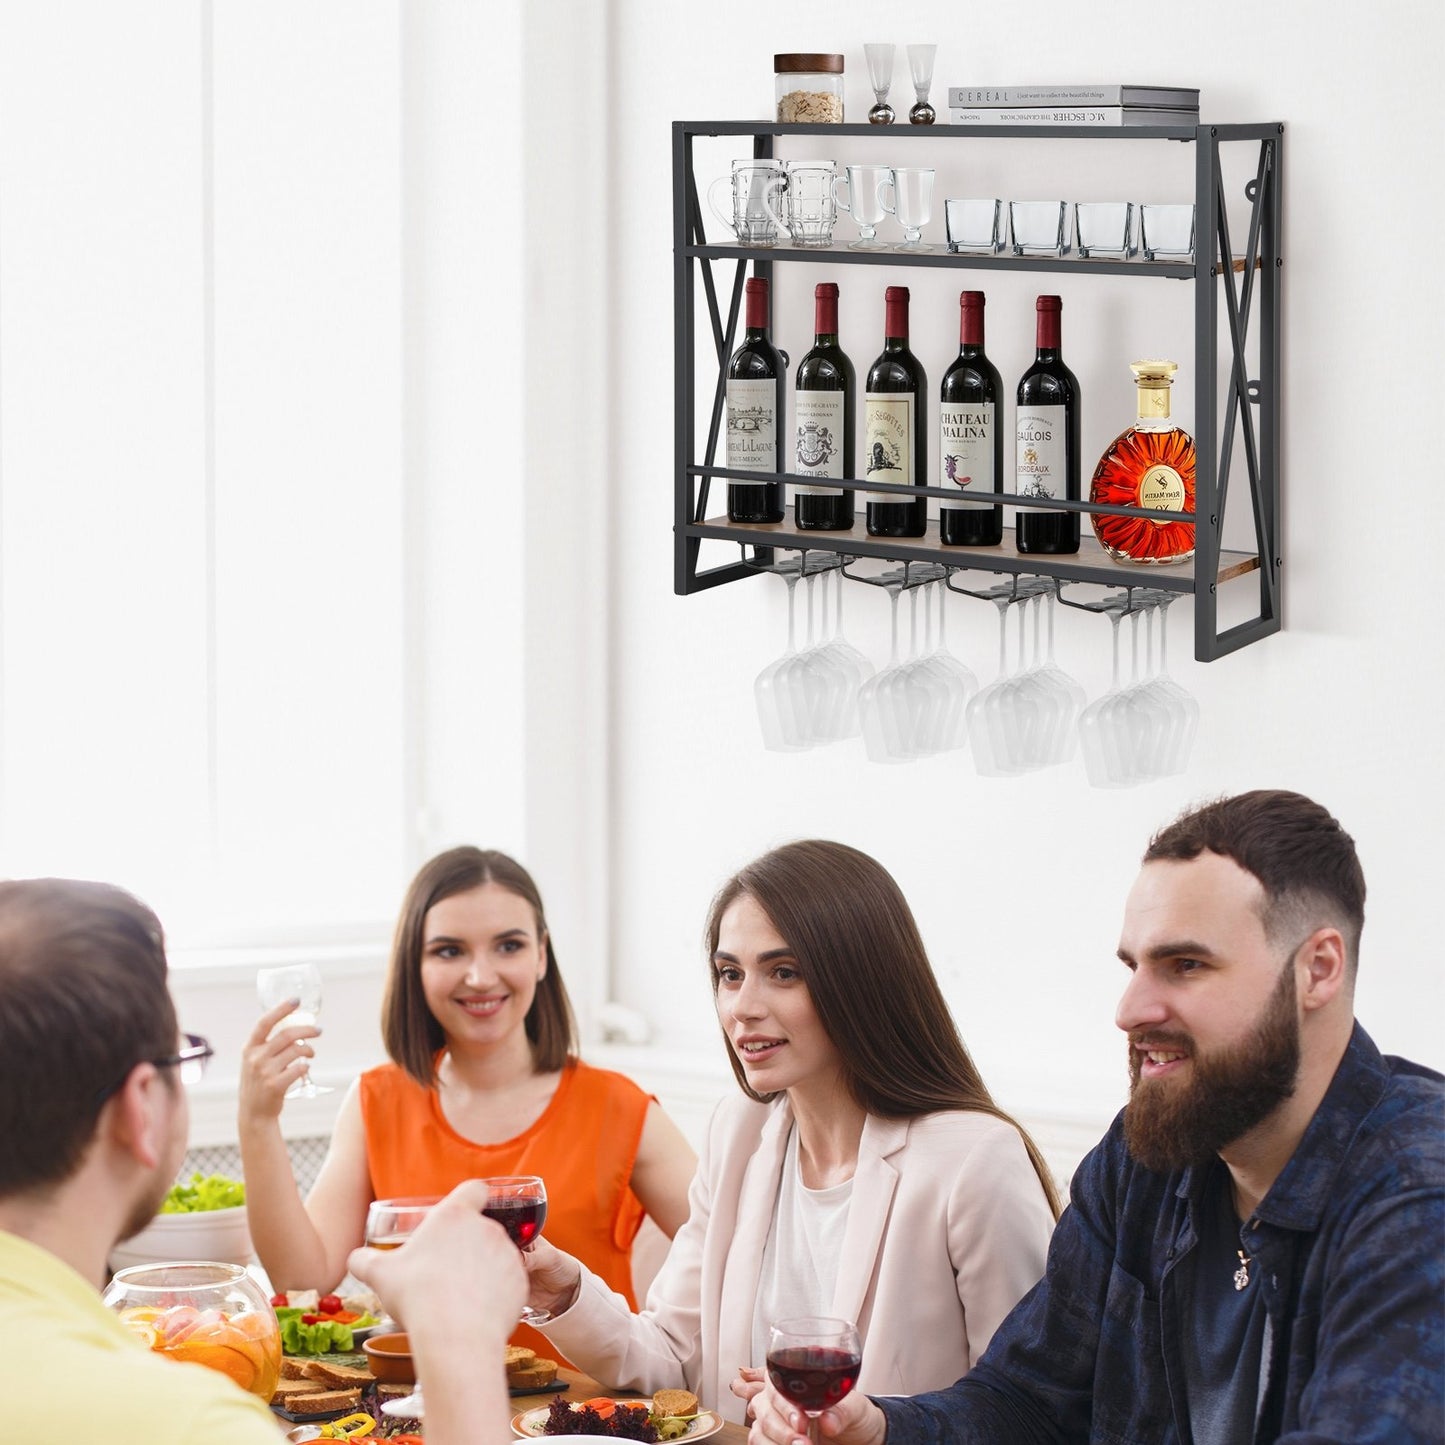 3-Tiers Industrial Wall Mounted Wine Rack with Glass Holder and Metal Frame, Rustic Brown